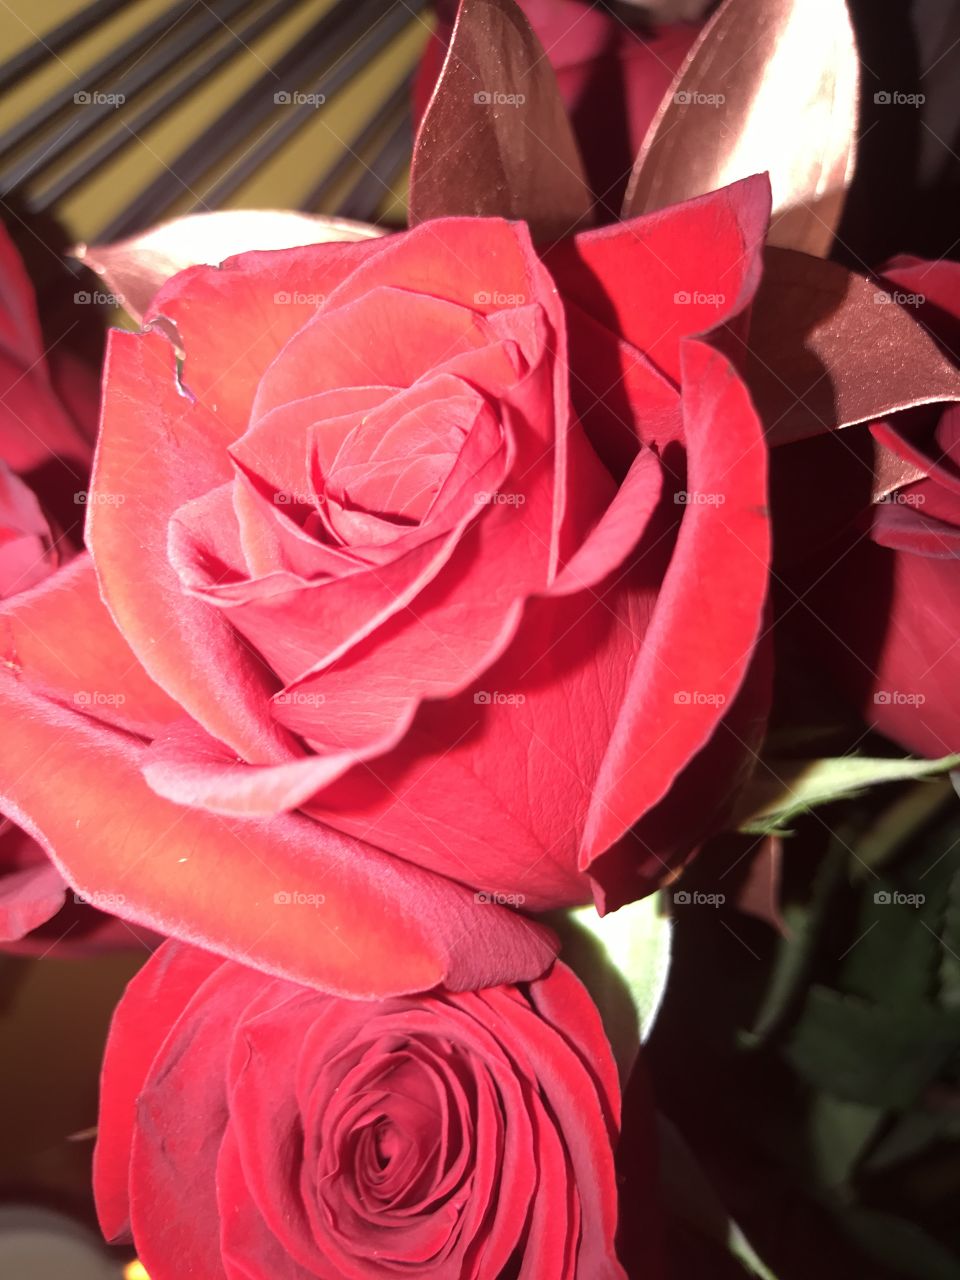 Just love red roses